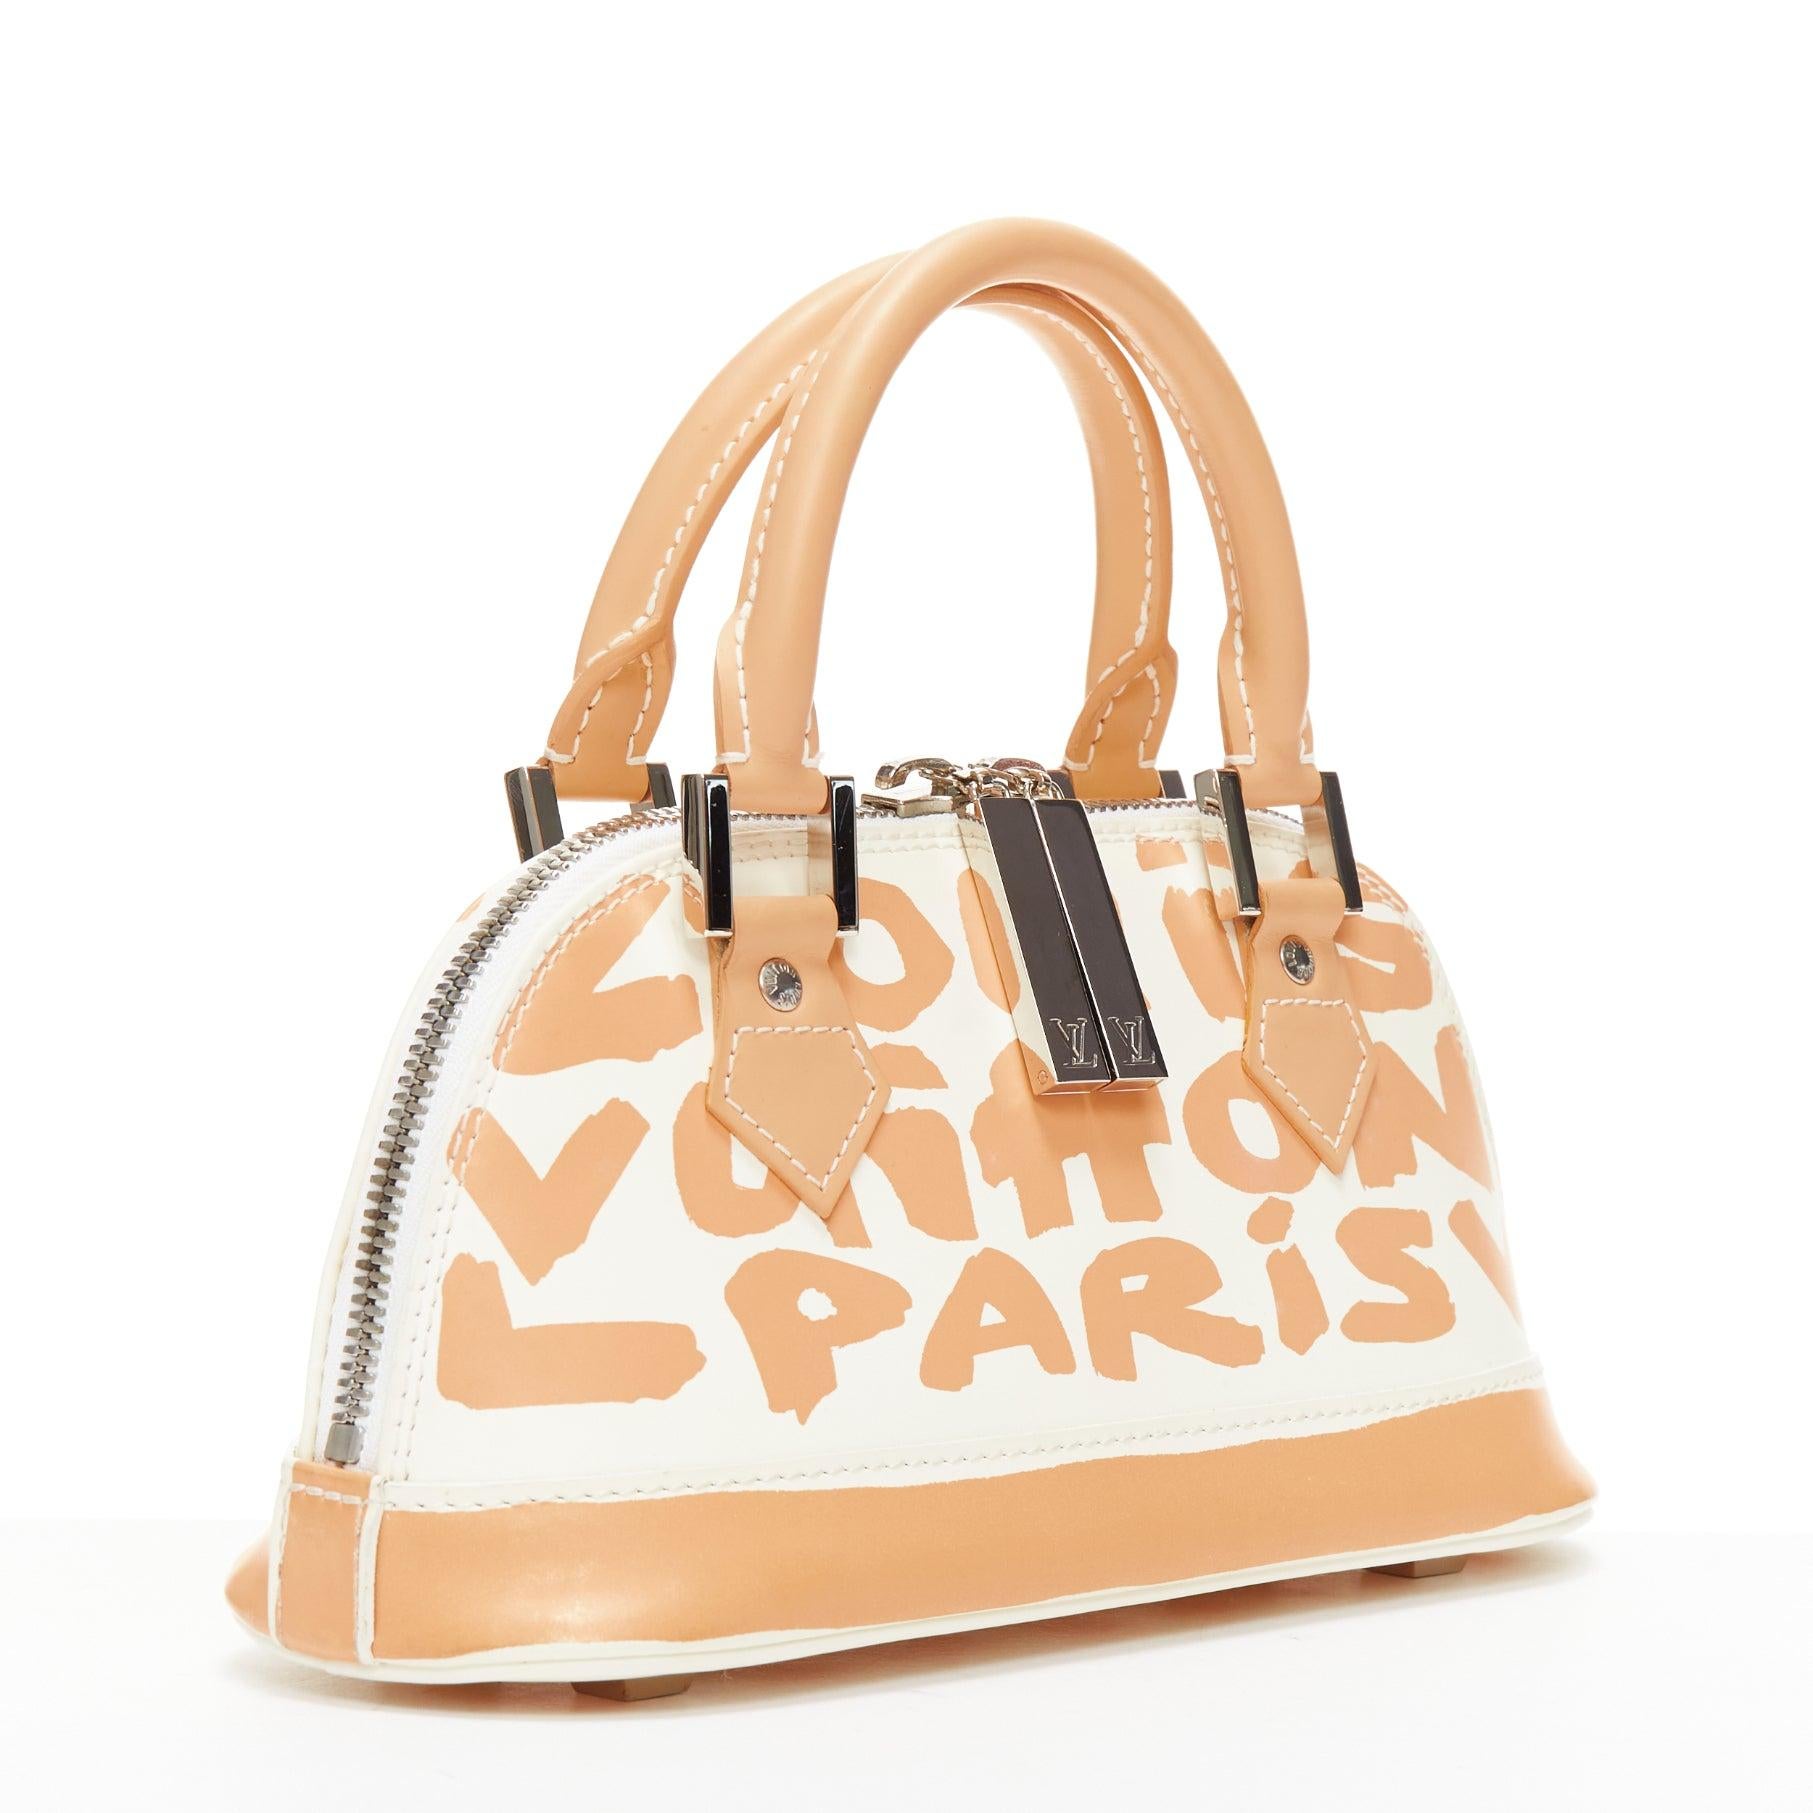 LOUIS VUITTON Stephen Spouse Alma Horizontal beige white graffiti leather bag In Good Condition For Sale In Hong Kong, NT